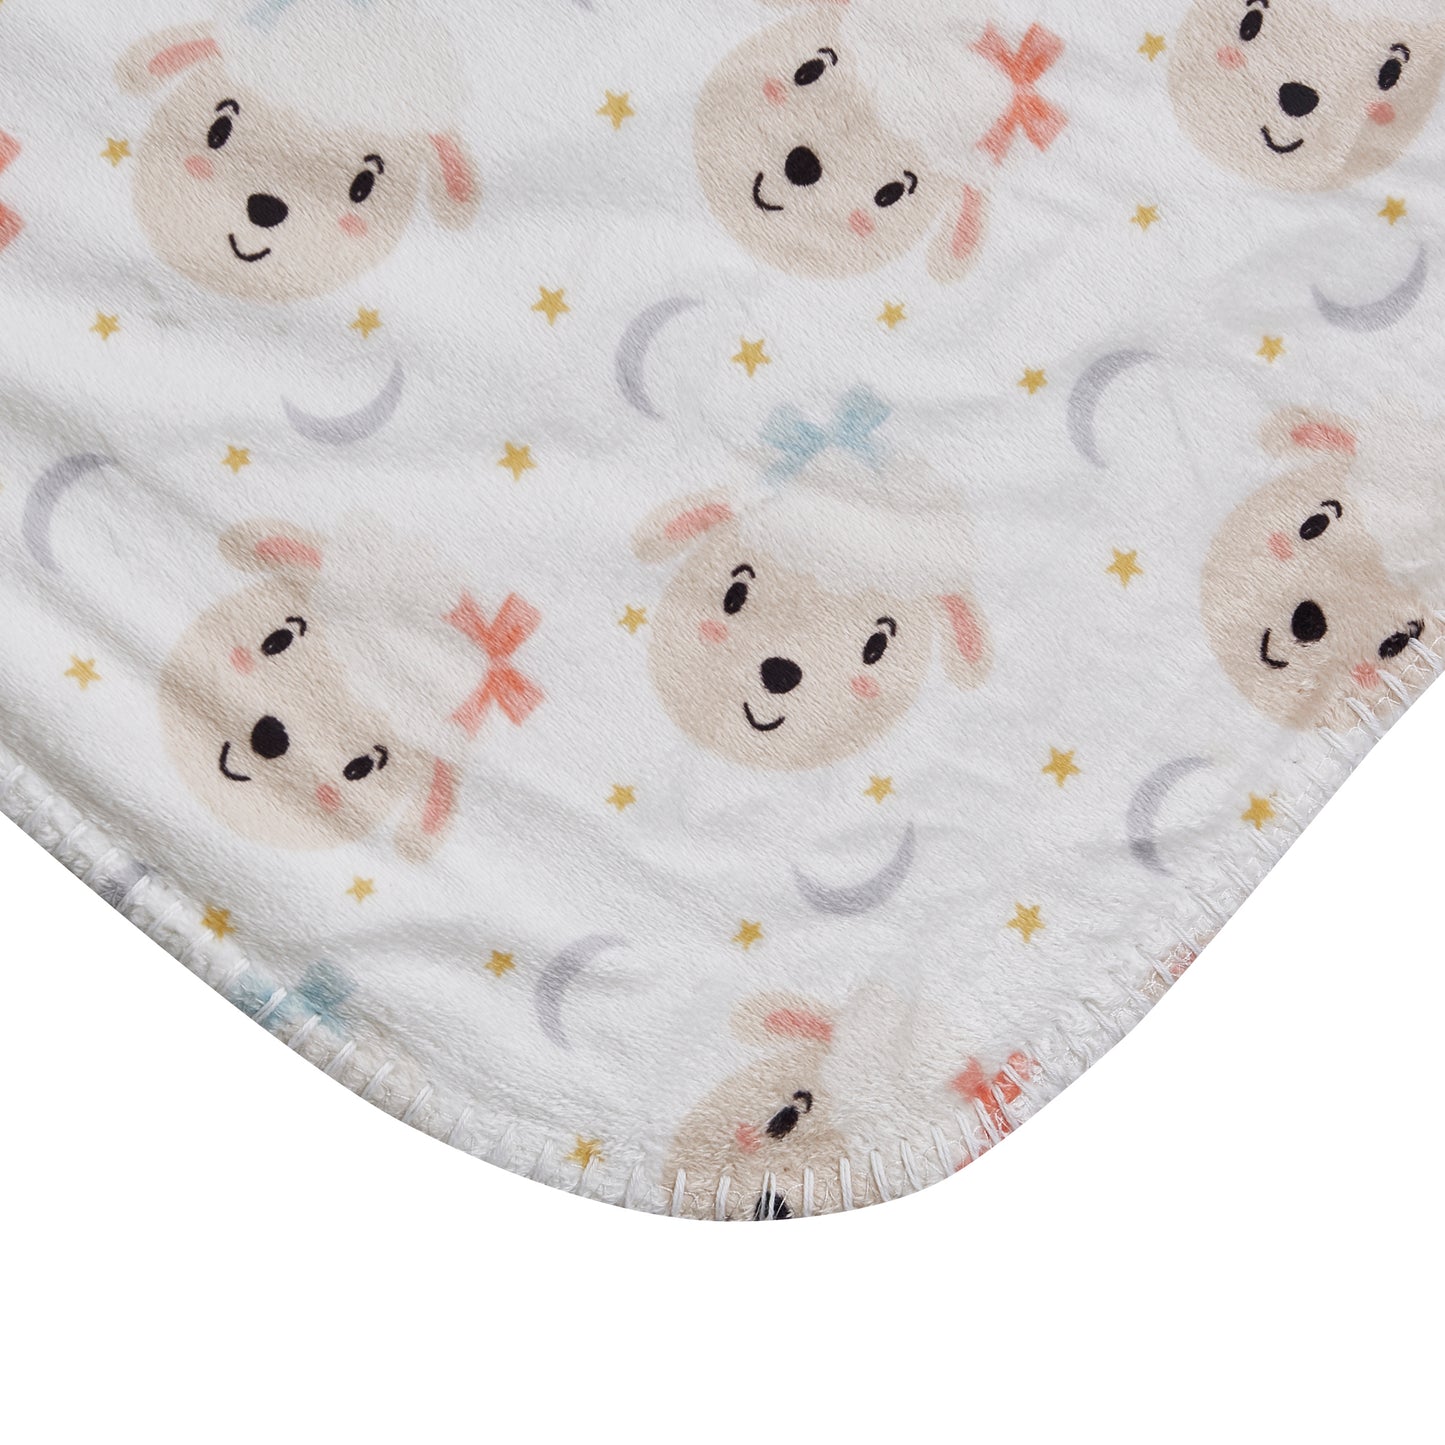 Mon Lapin by Thesis Print Mink Baby Blanket - Lamb